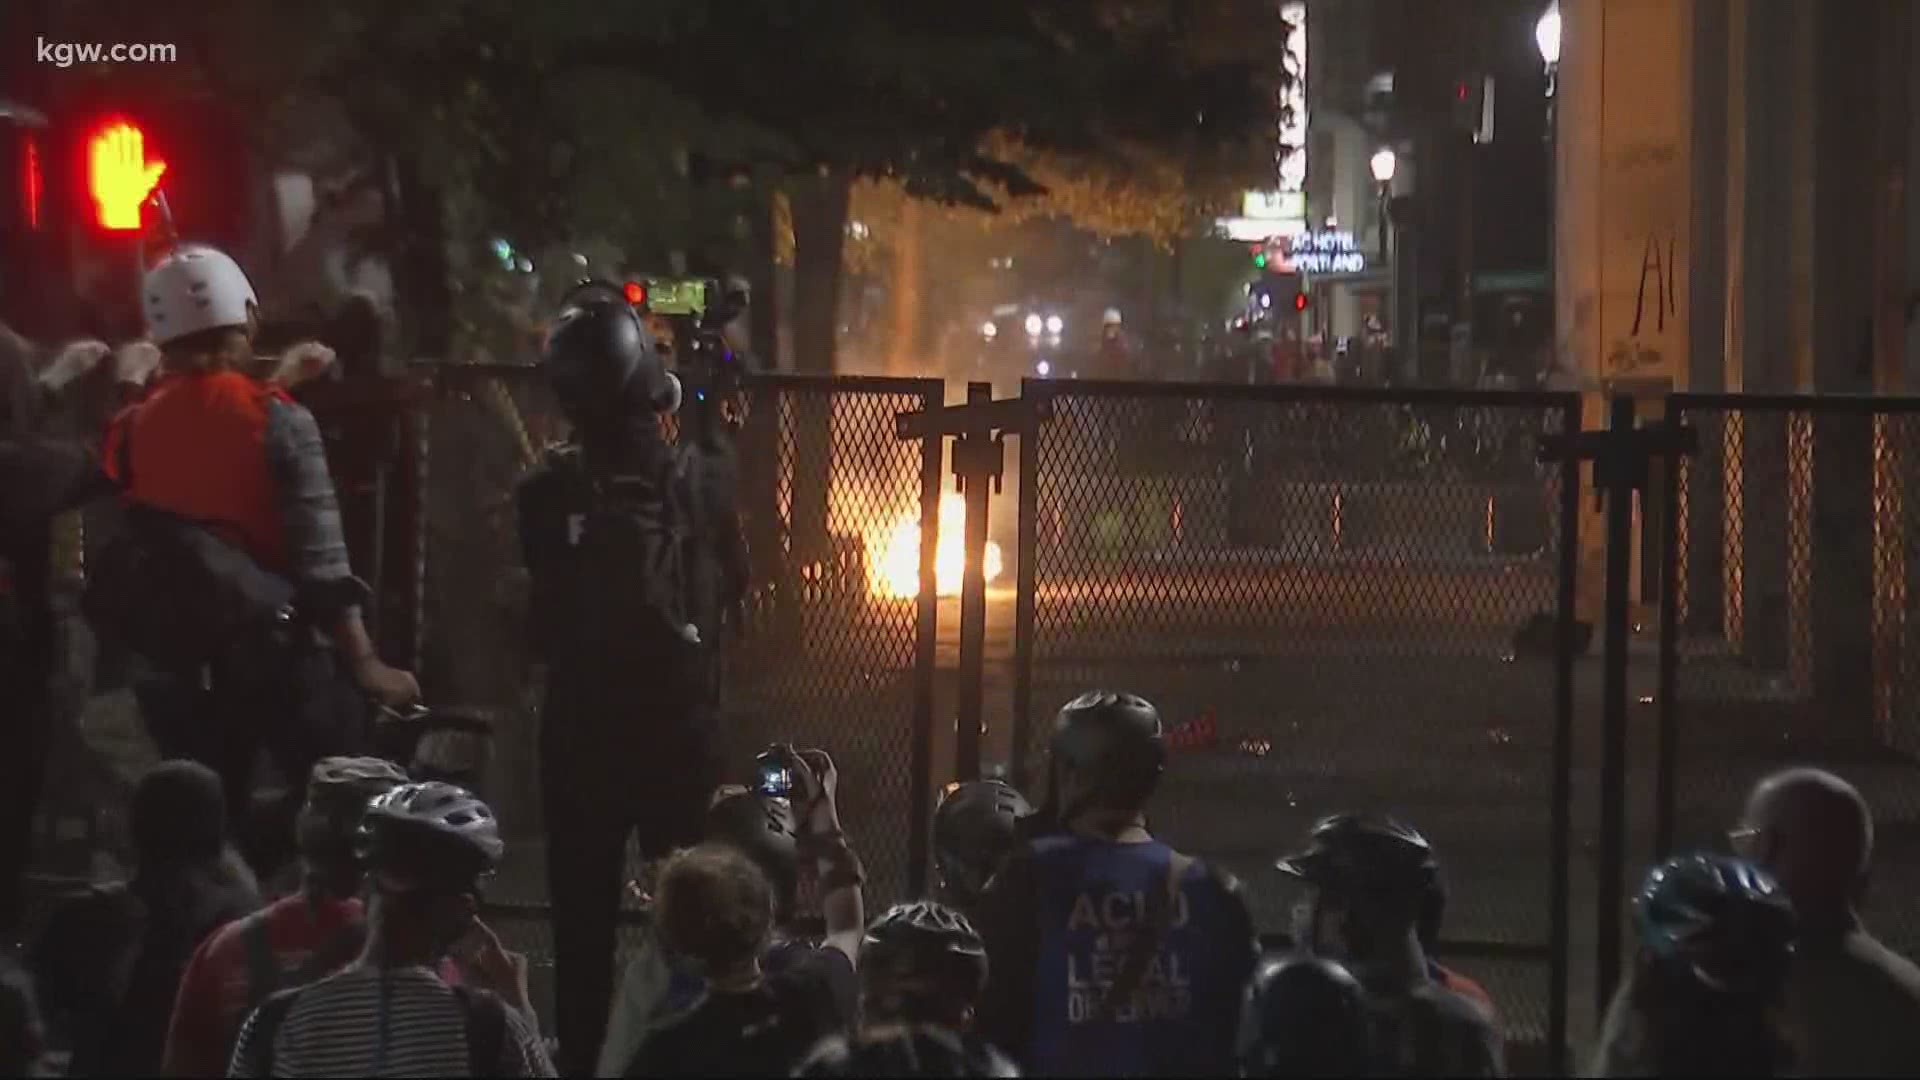 Federal officers used tear gas after some people lit fires inside the fence near the federal courthouse.